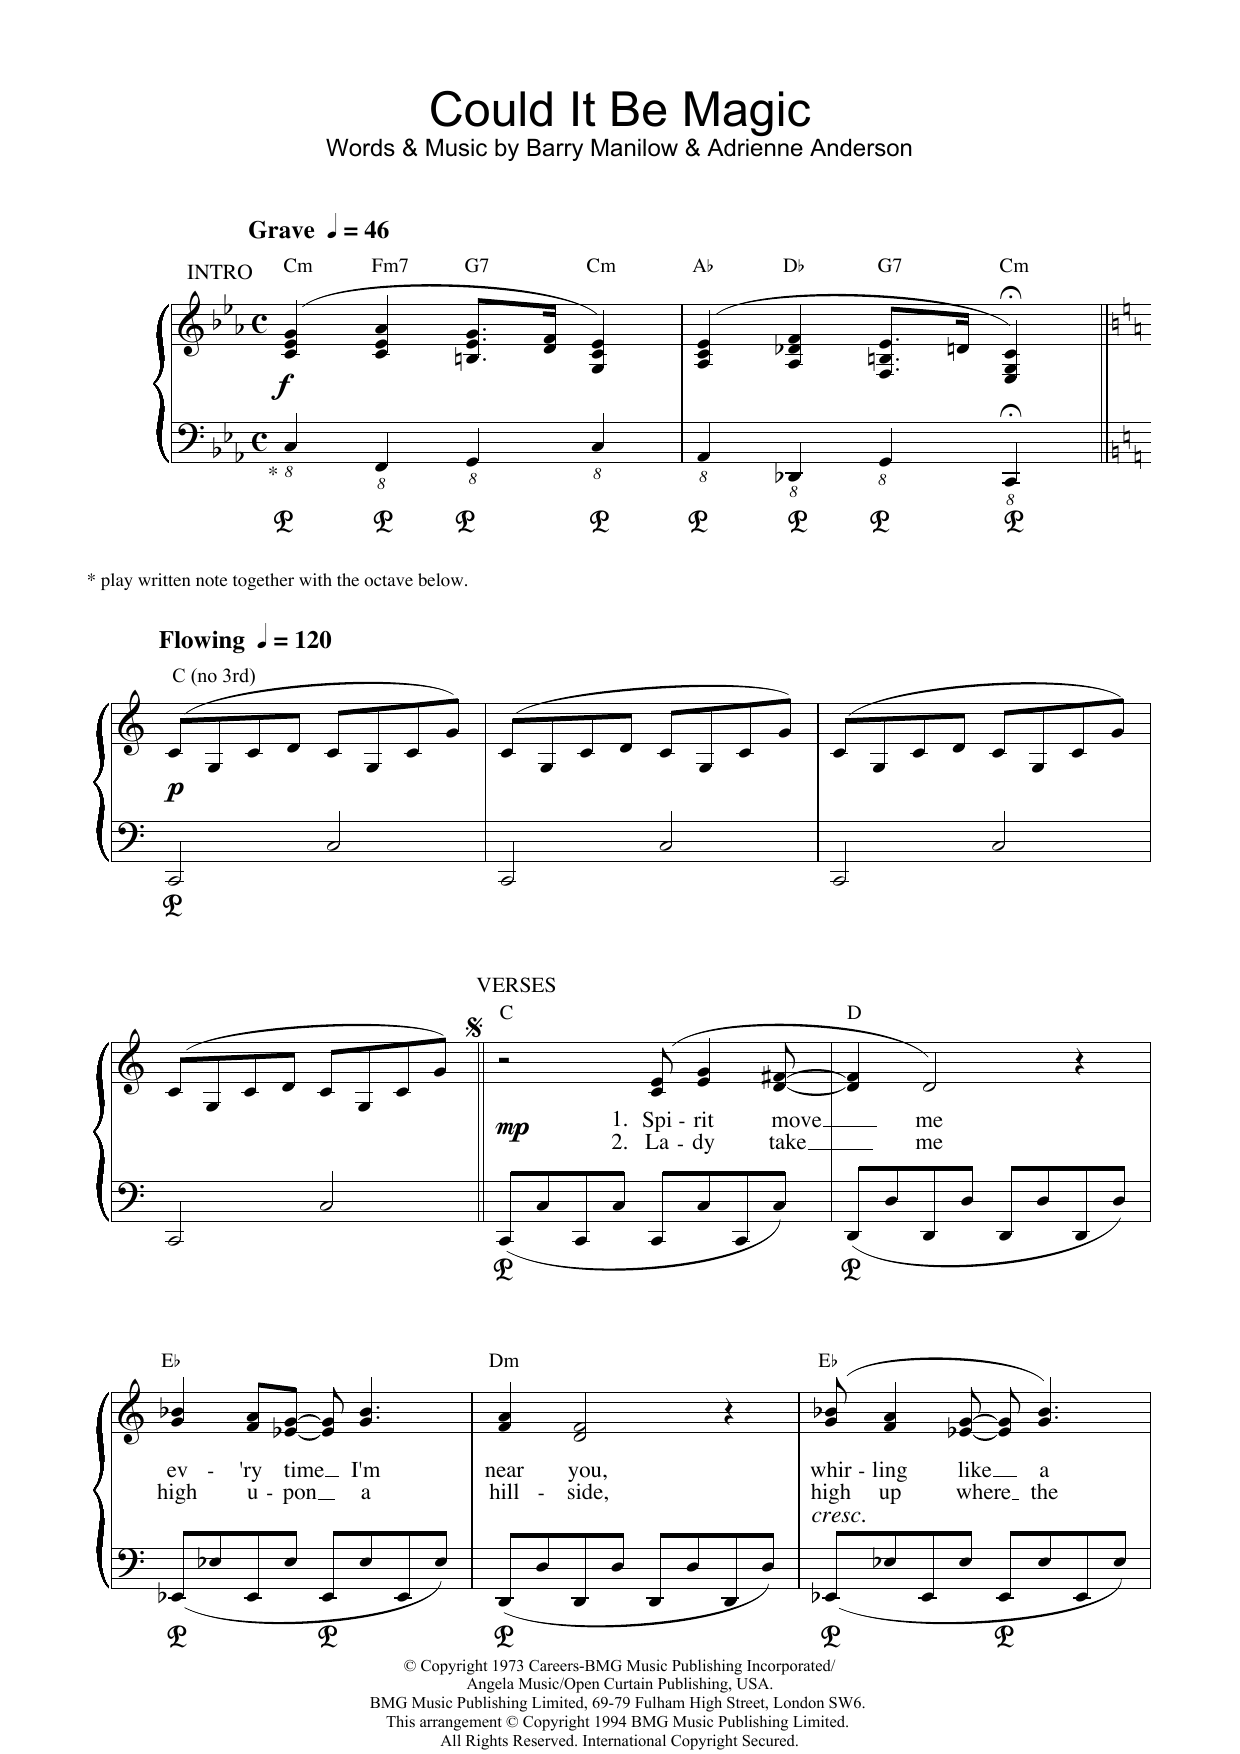 Download Barry Manilow Could It Be Magic Sheet Music